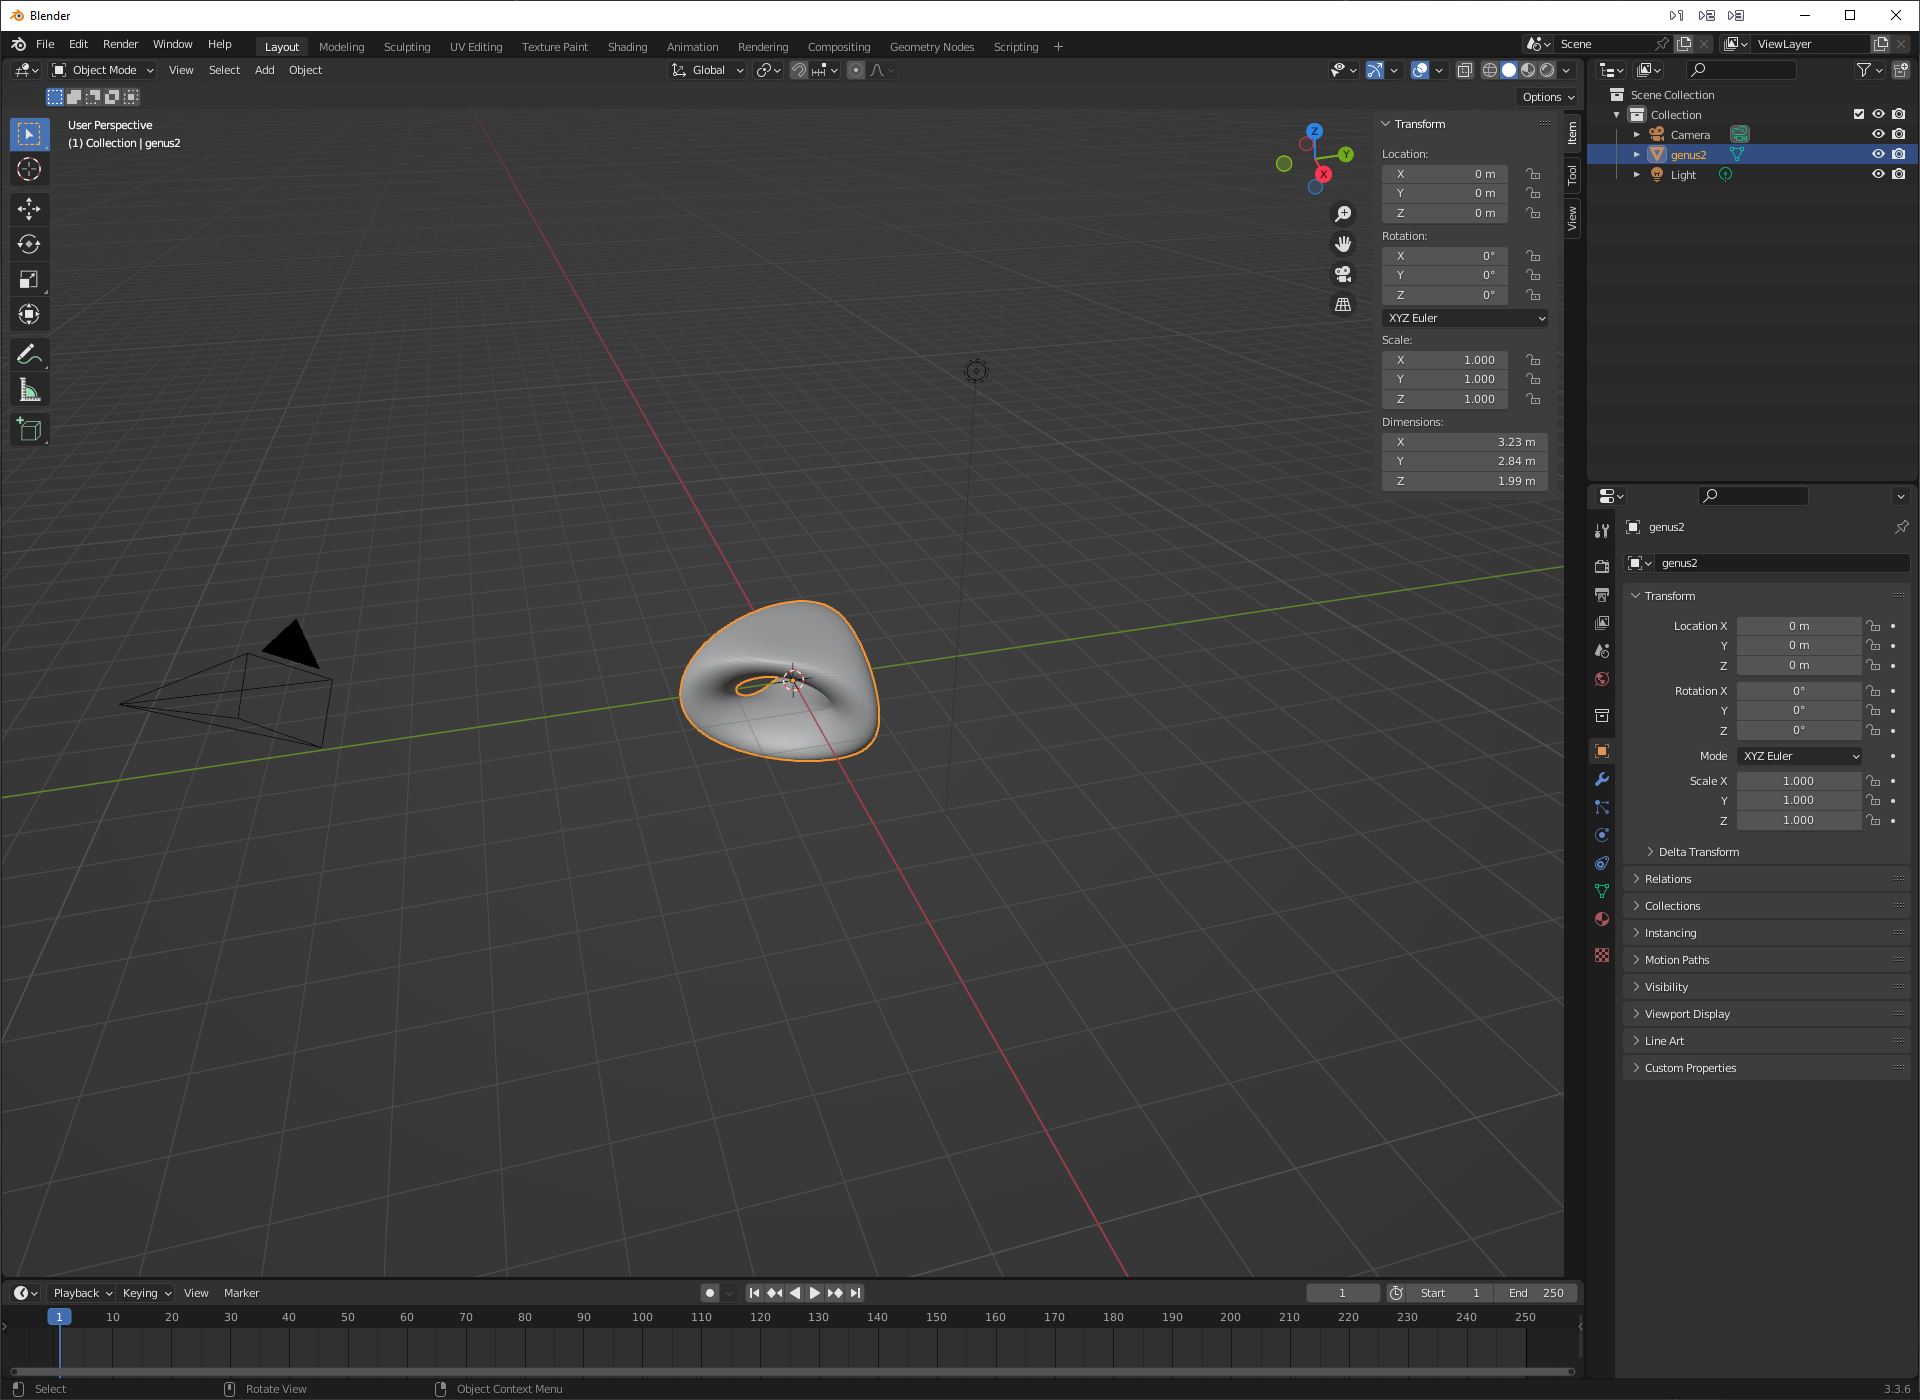 The imported Genus 2 isosurface in Blender.